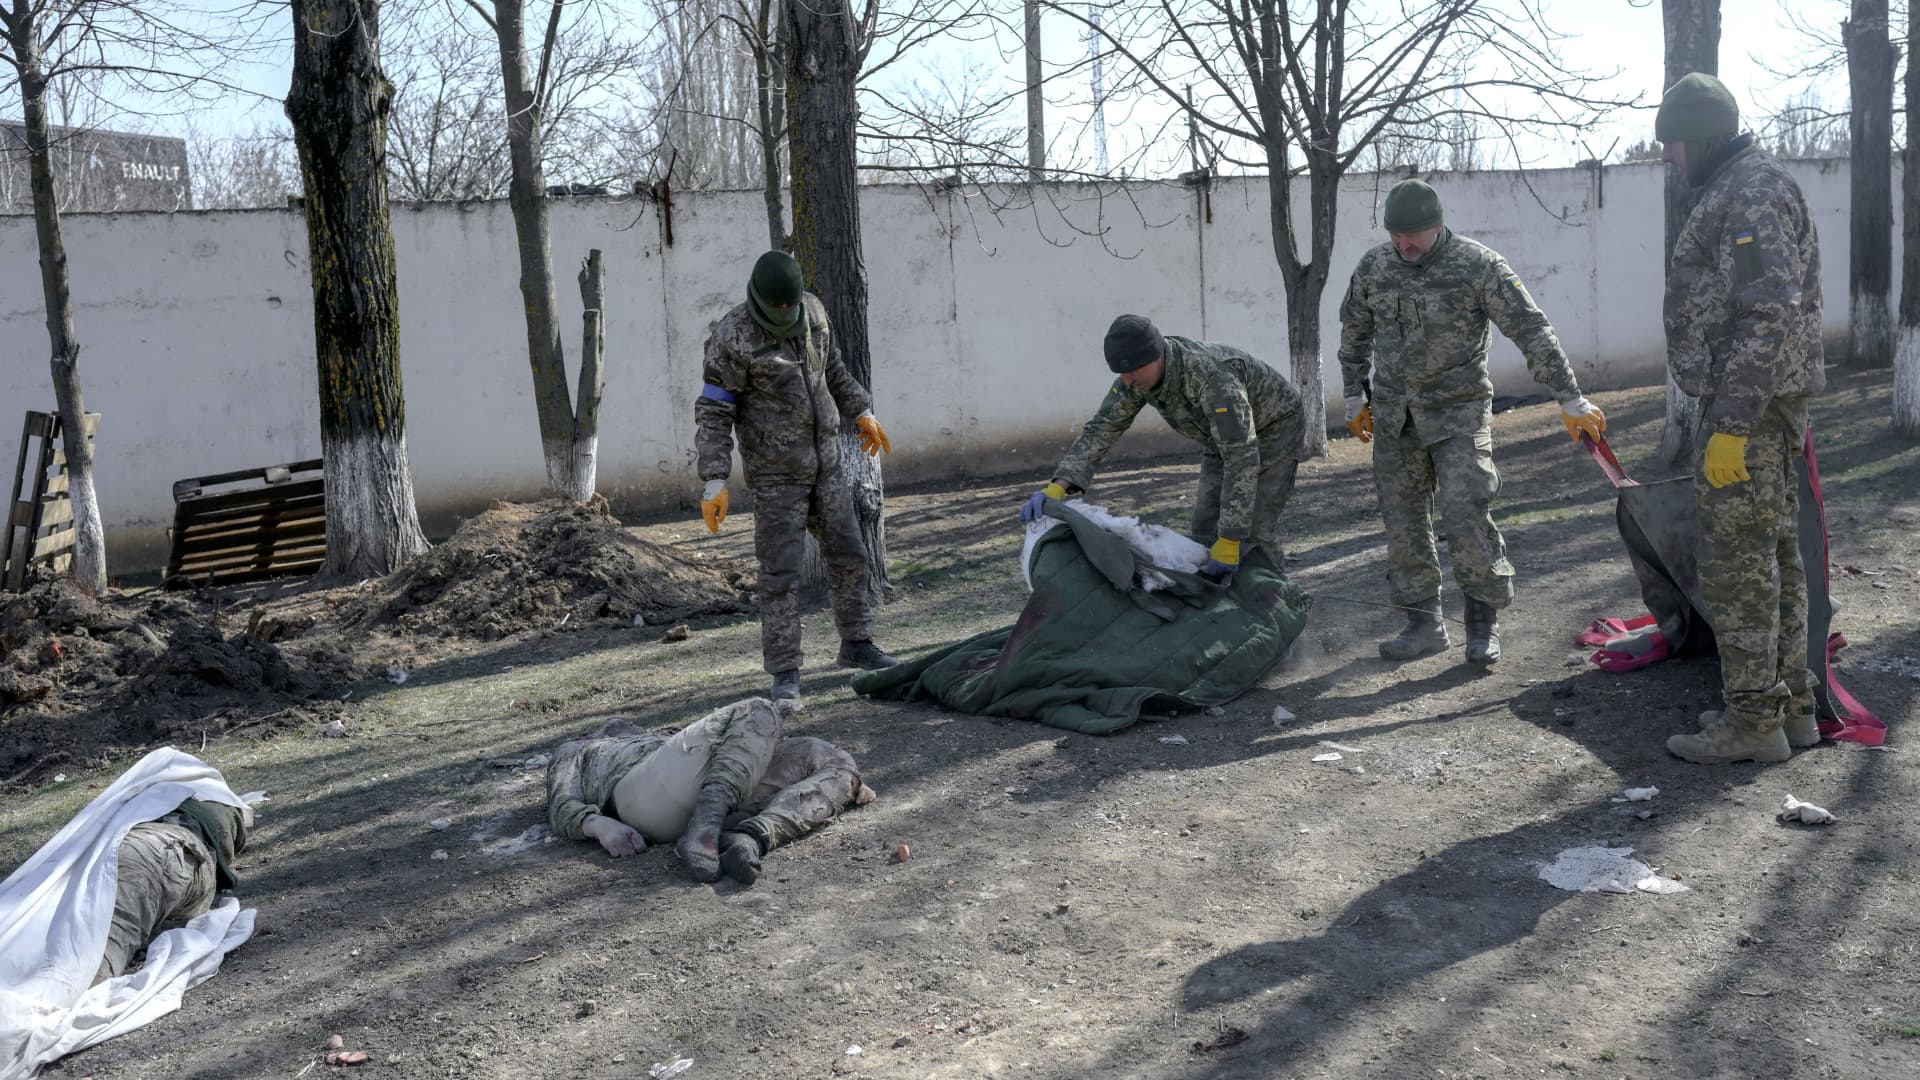 EDITORS NOTE: Graphic content / Ukrainian soldiers cover bodies of dead soldiers laying next to the military school hit by Russian rockets the day before, in Mykolaiv, southern Ukraine, on March 19, 2022.